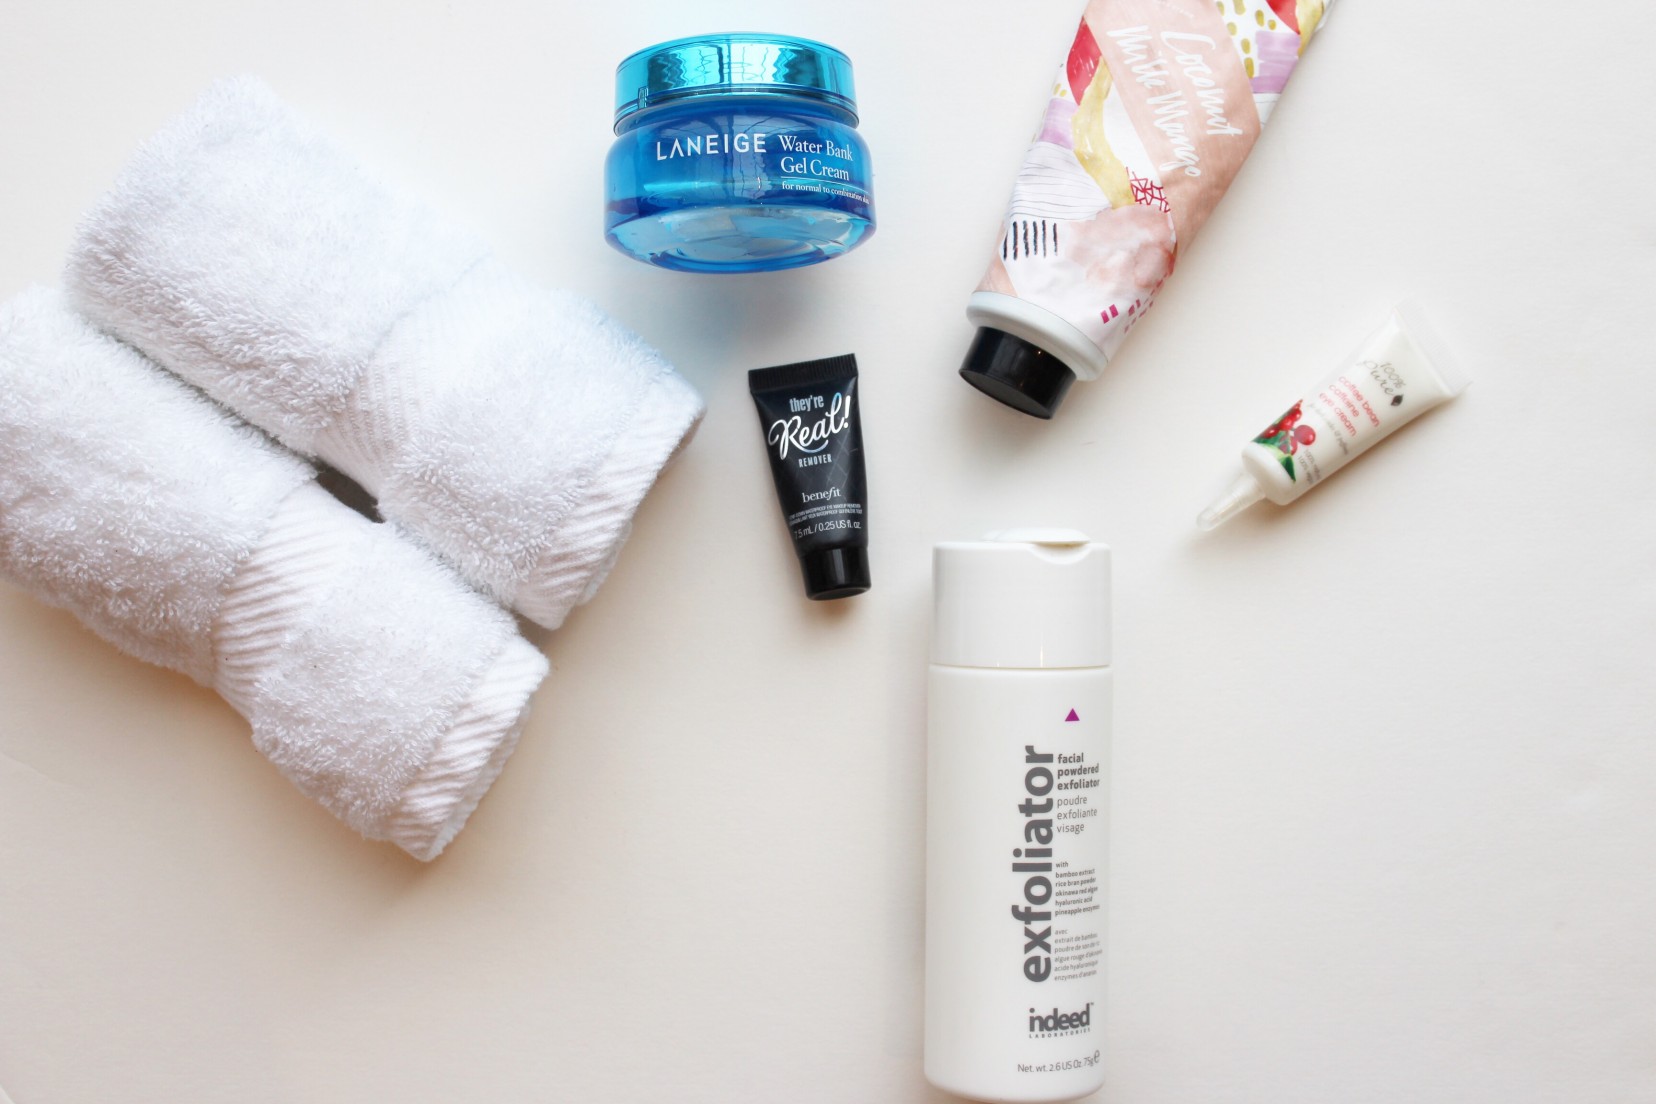 My Top 5 Skincare Products for Surviving Winter